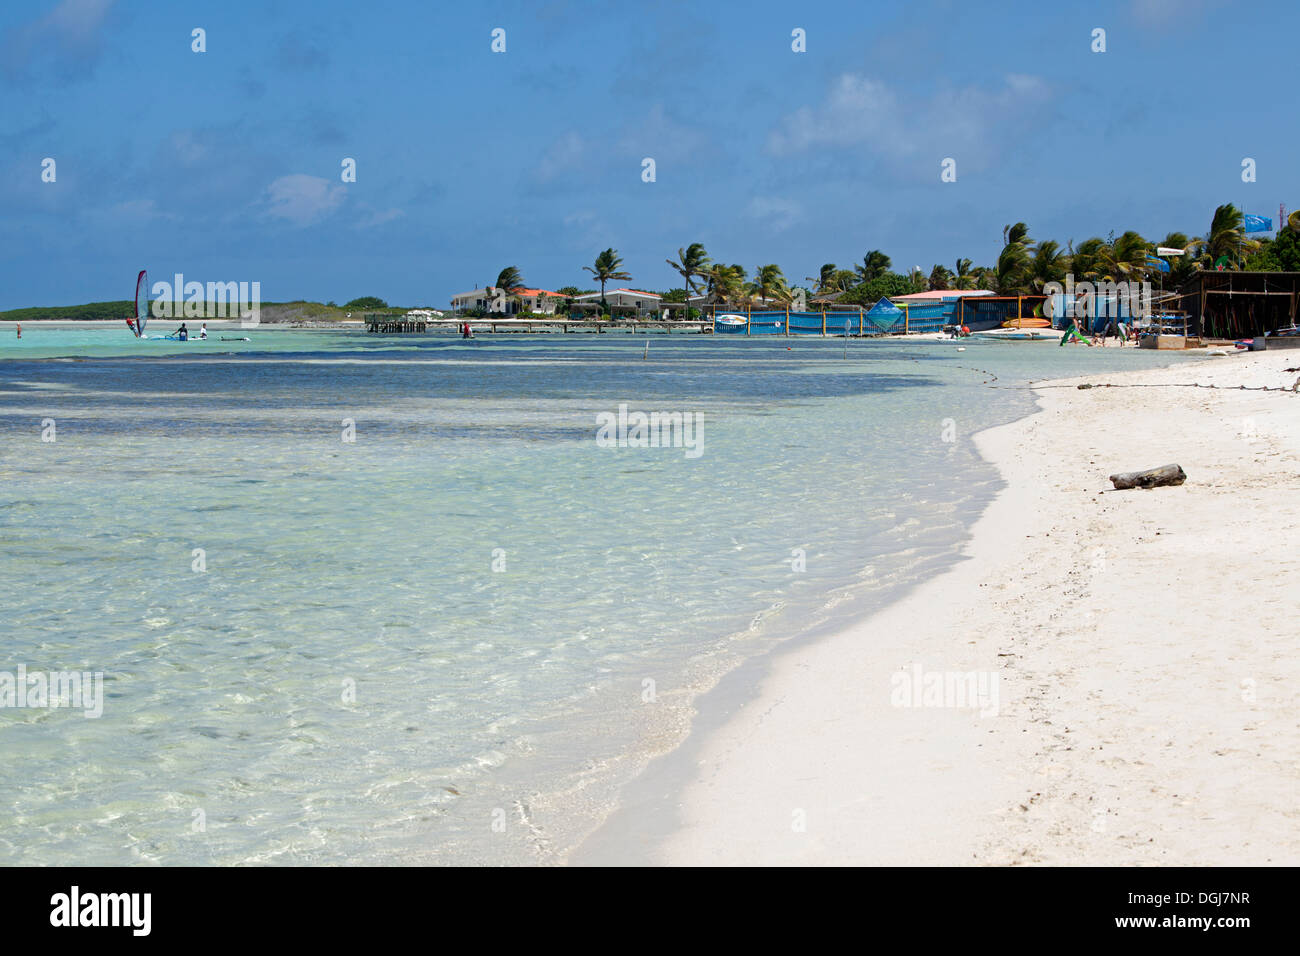 The beach at Lac Bay is a well known windsurfing location. Stock Photo